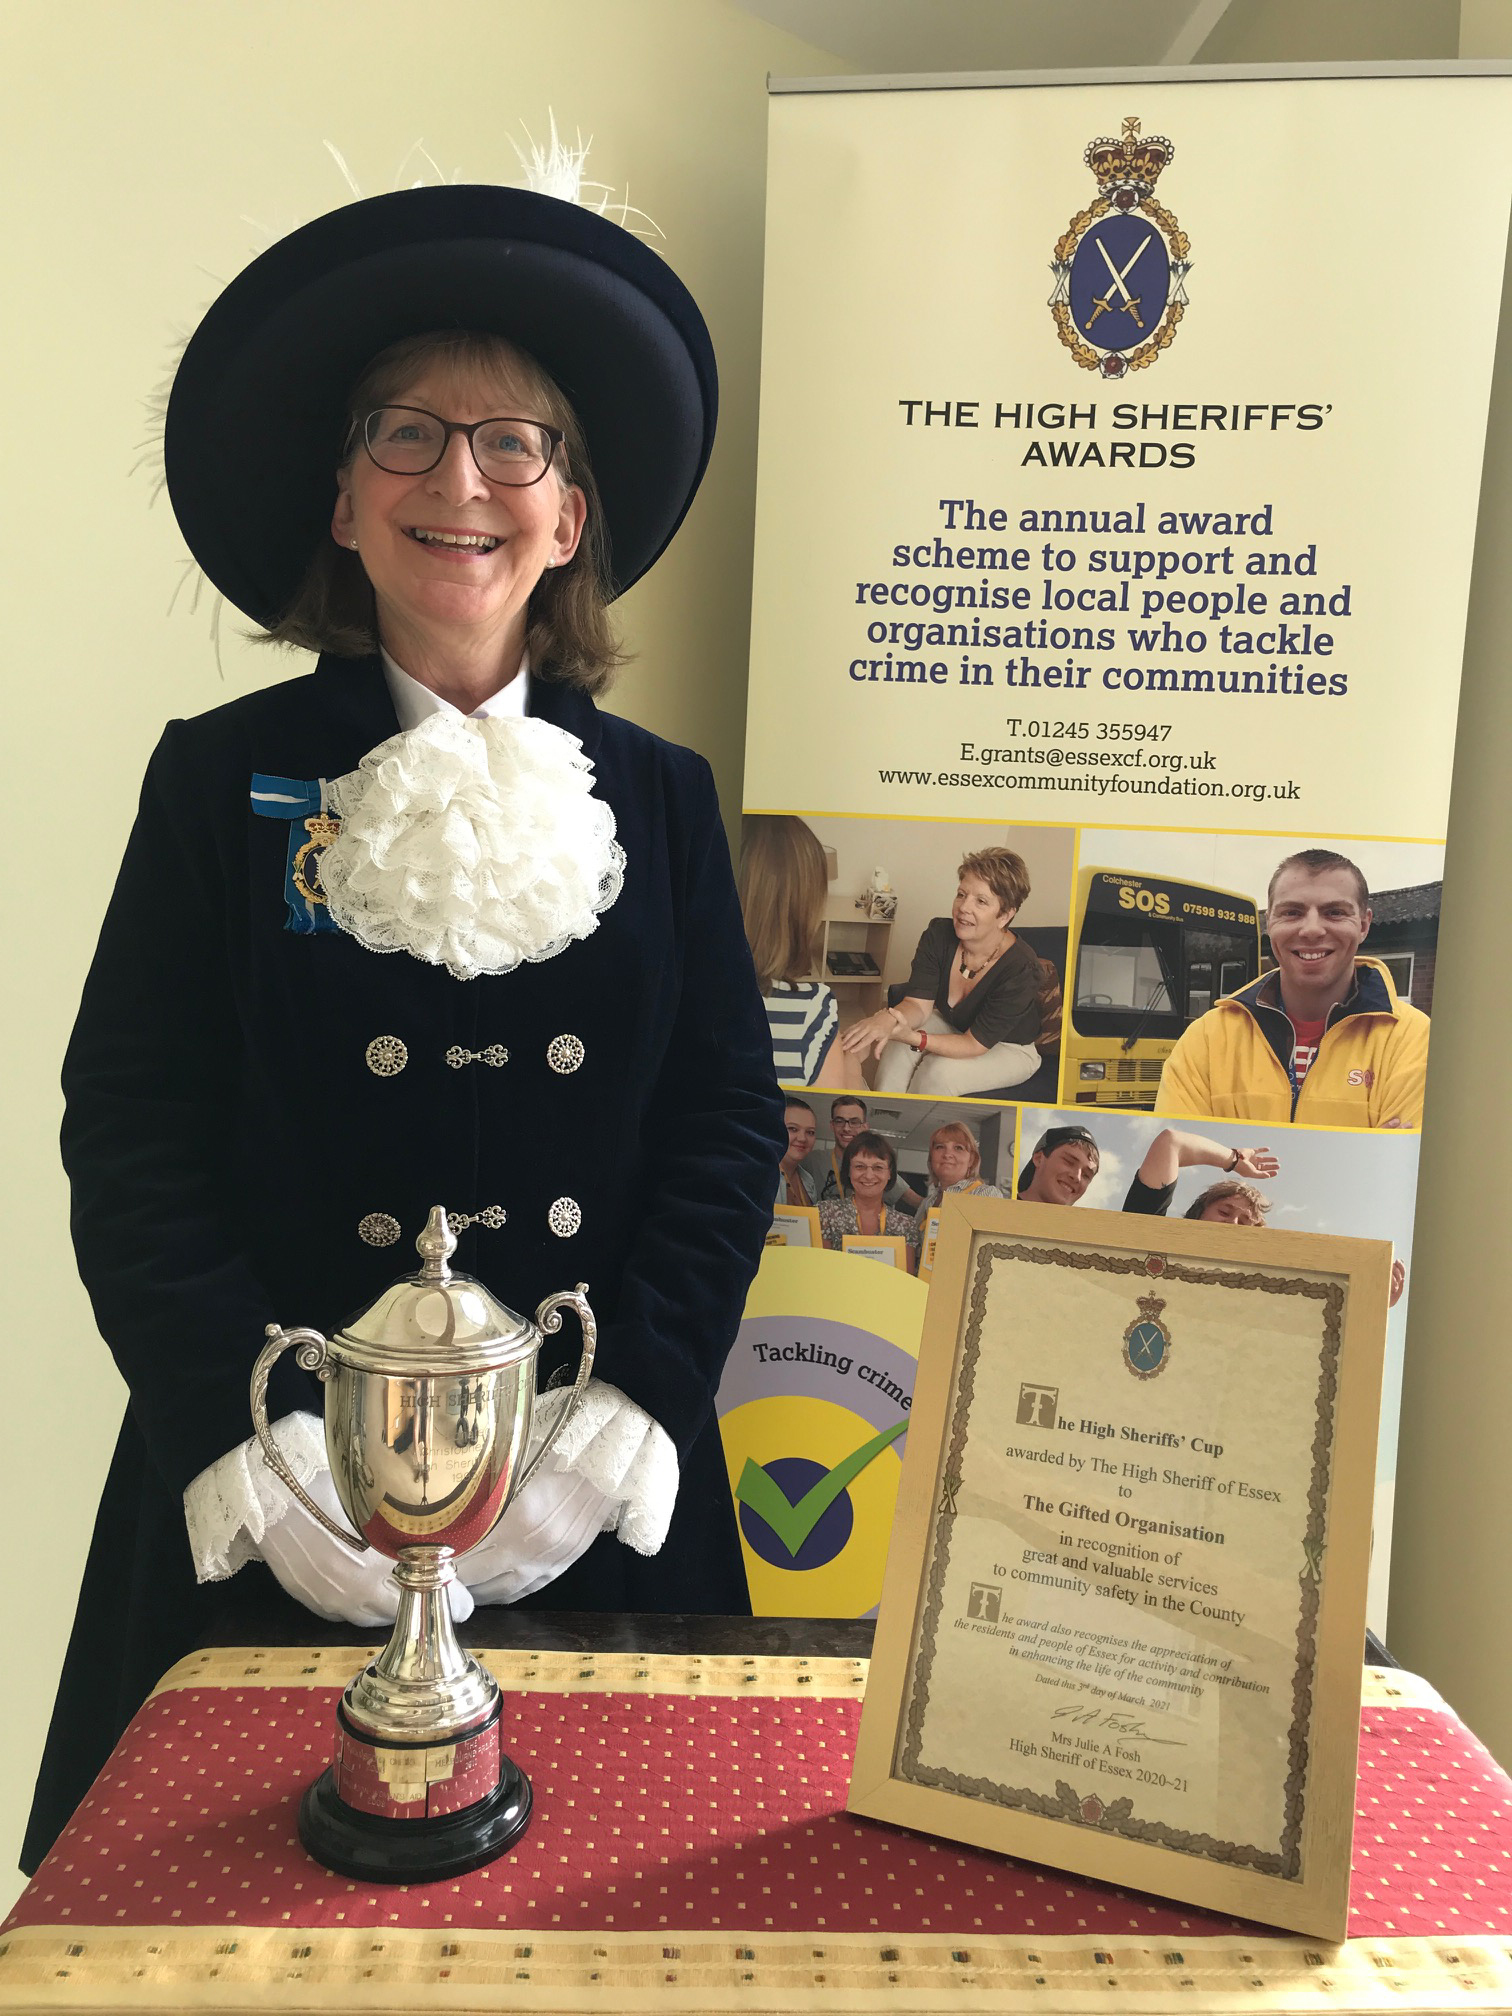 The Gifted Organisation won the High Sheriffs Cup